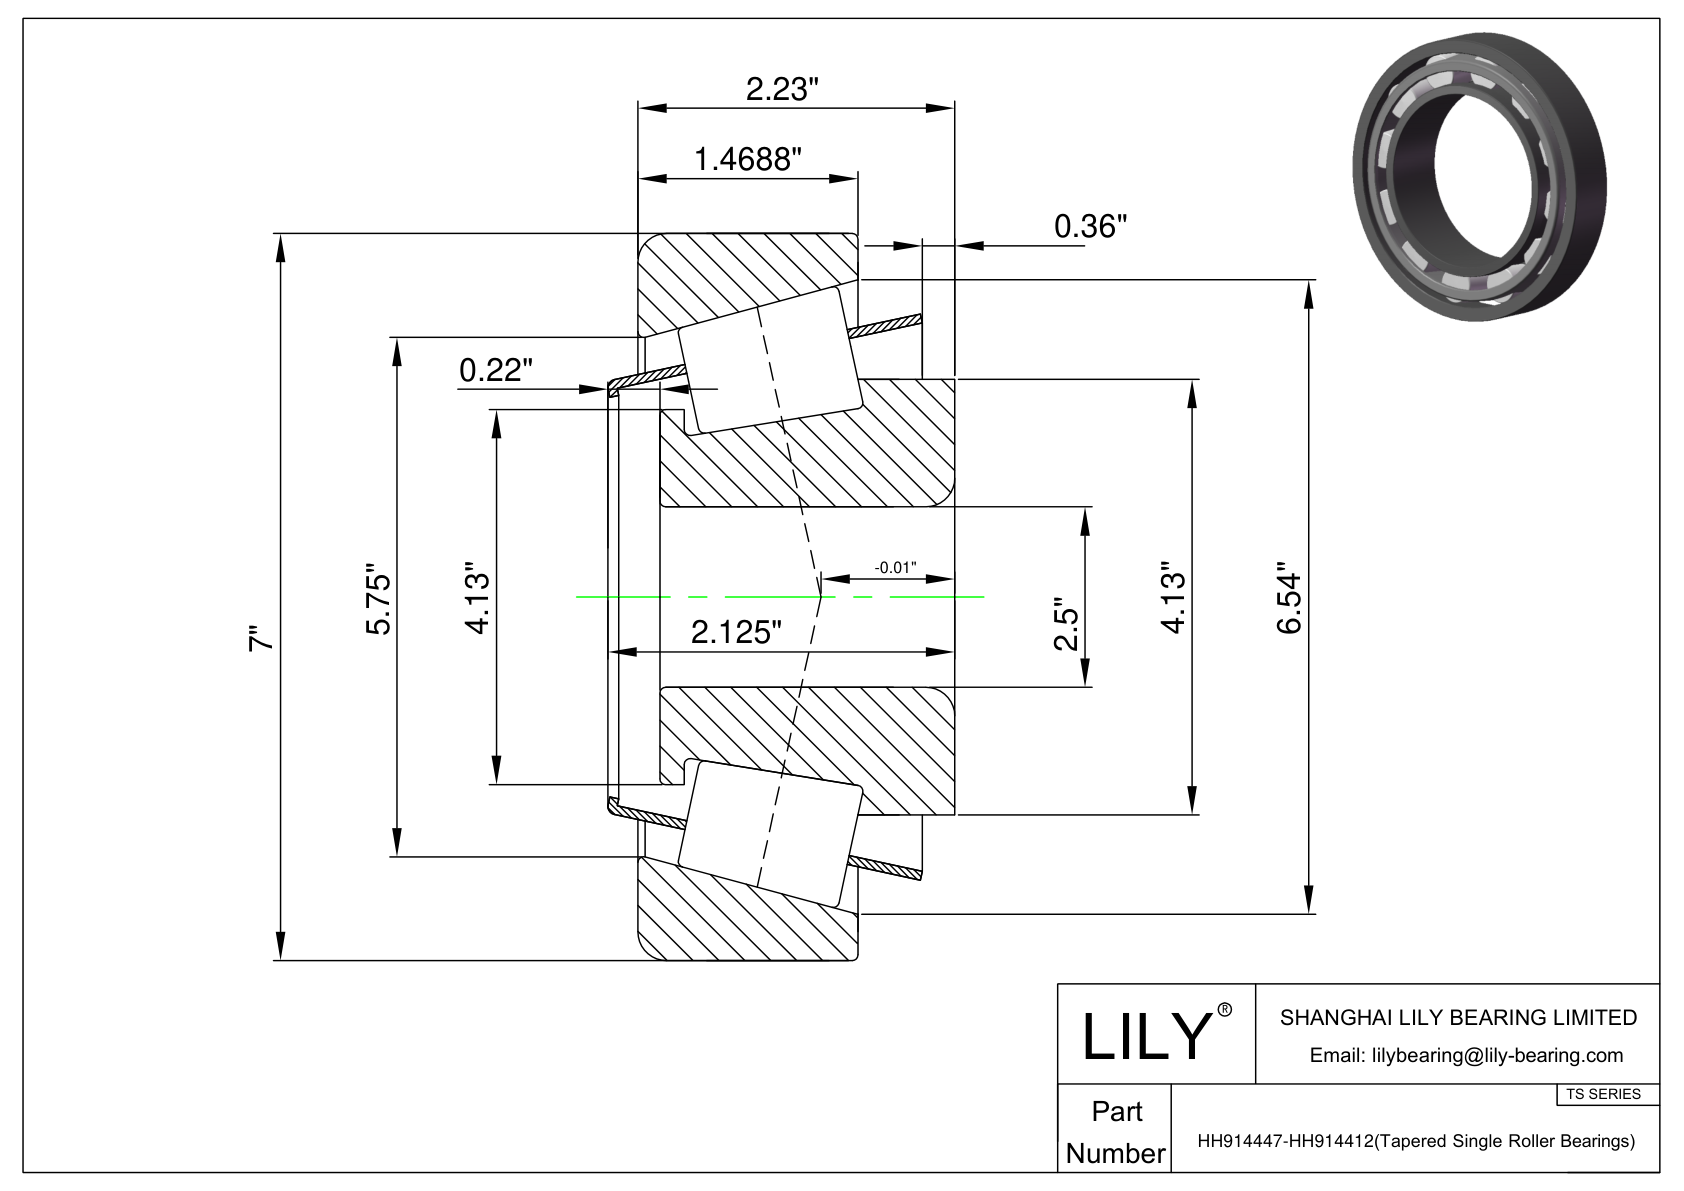 HH914447-HH914412 TS (Tapered Single Roller Bearings) (Imperial) cad drawing